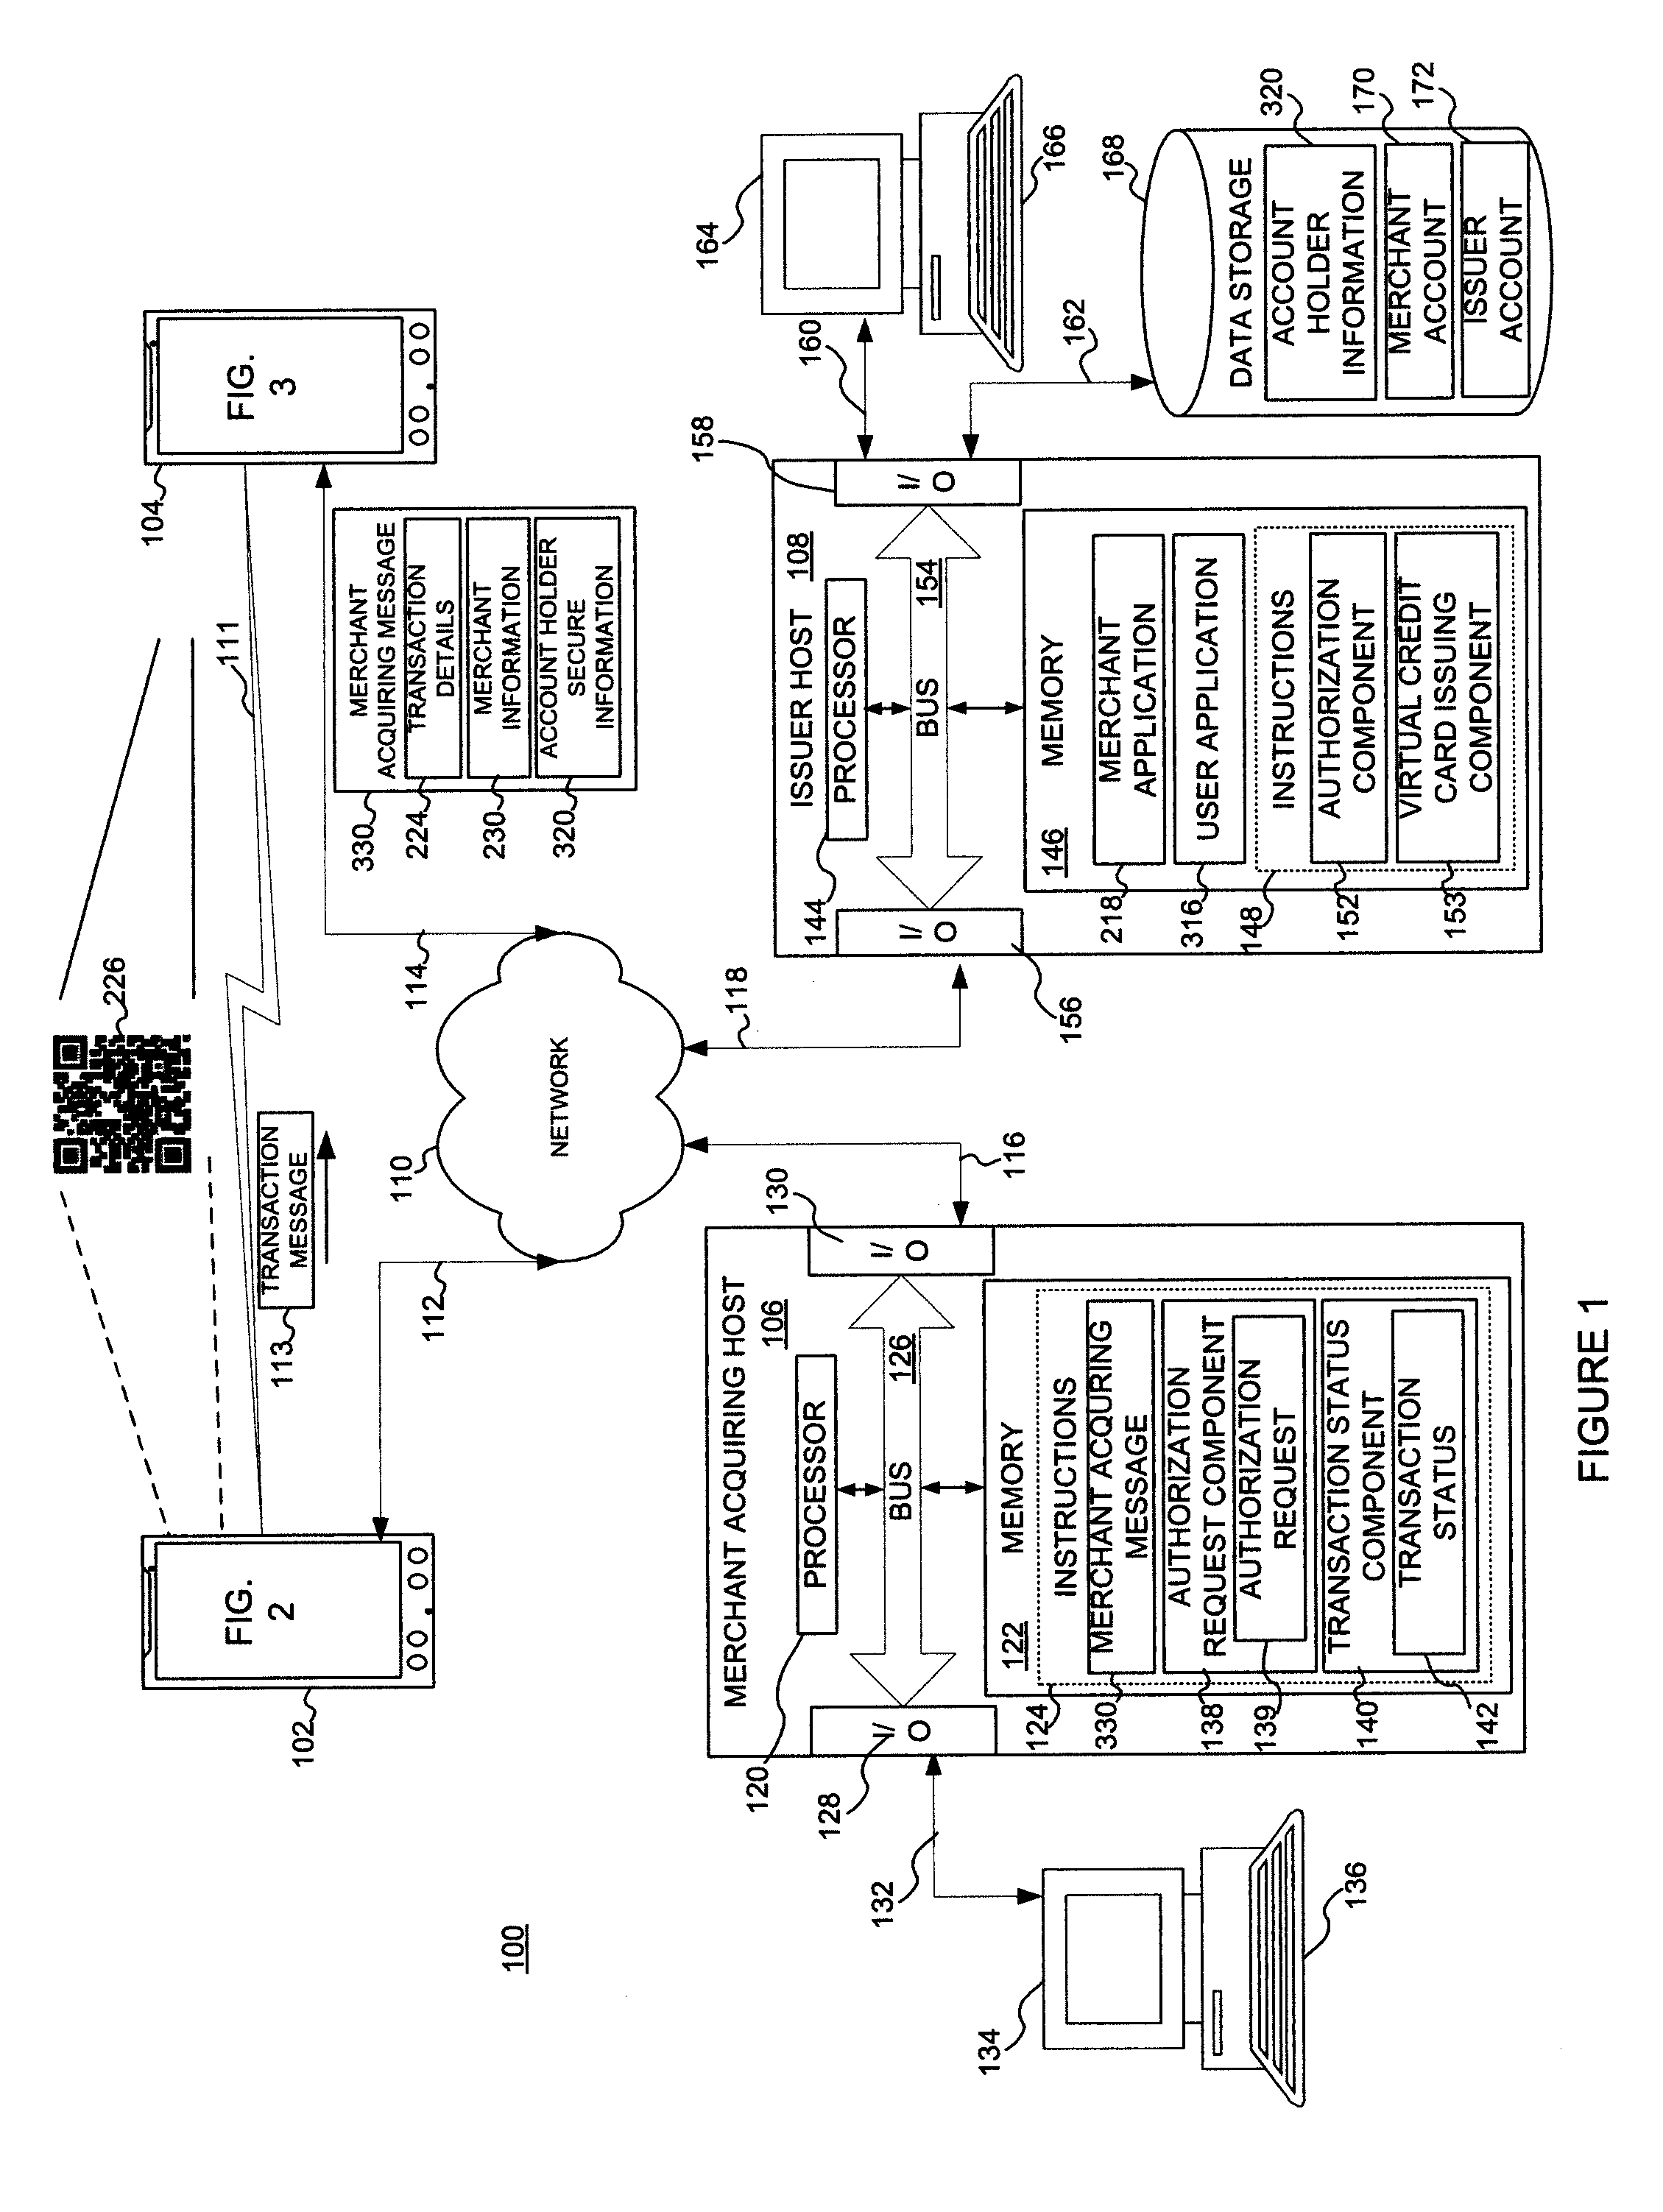 System and method for mobile transaction payments